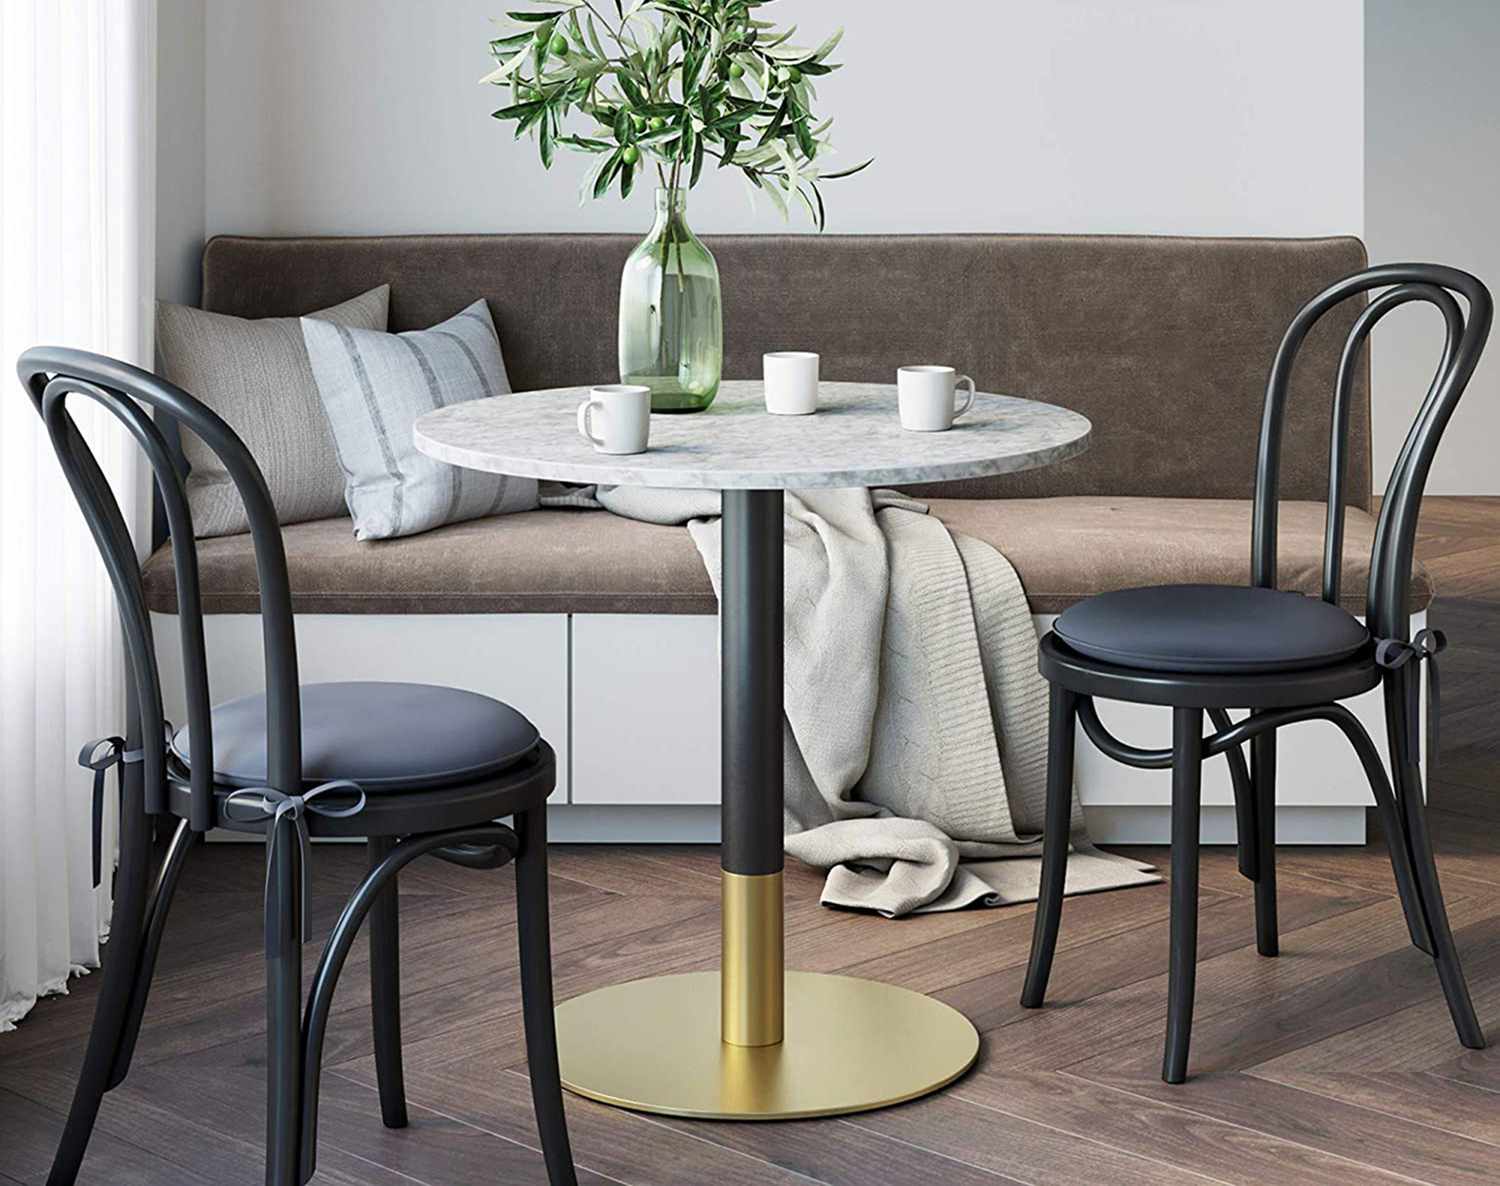 8 Best Dining Tables For Small Spaces, Round Dining Table Small Space